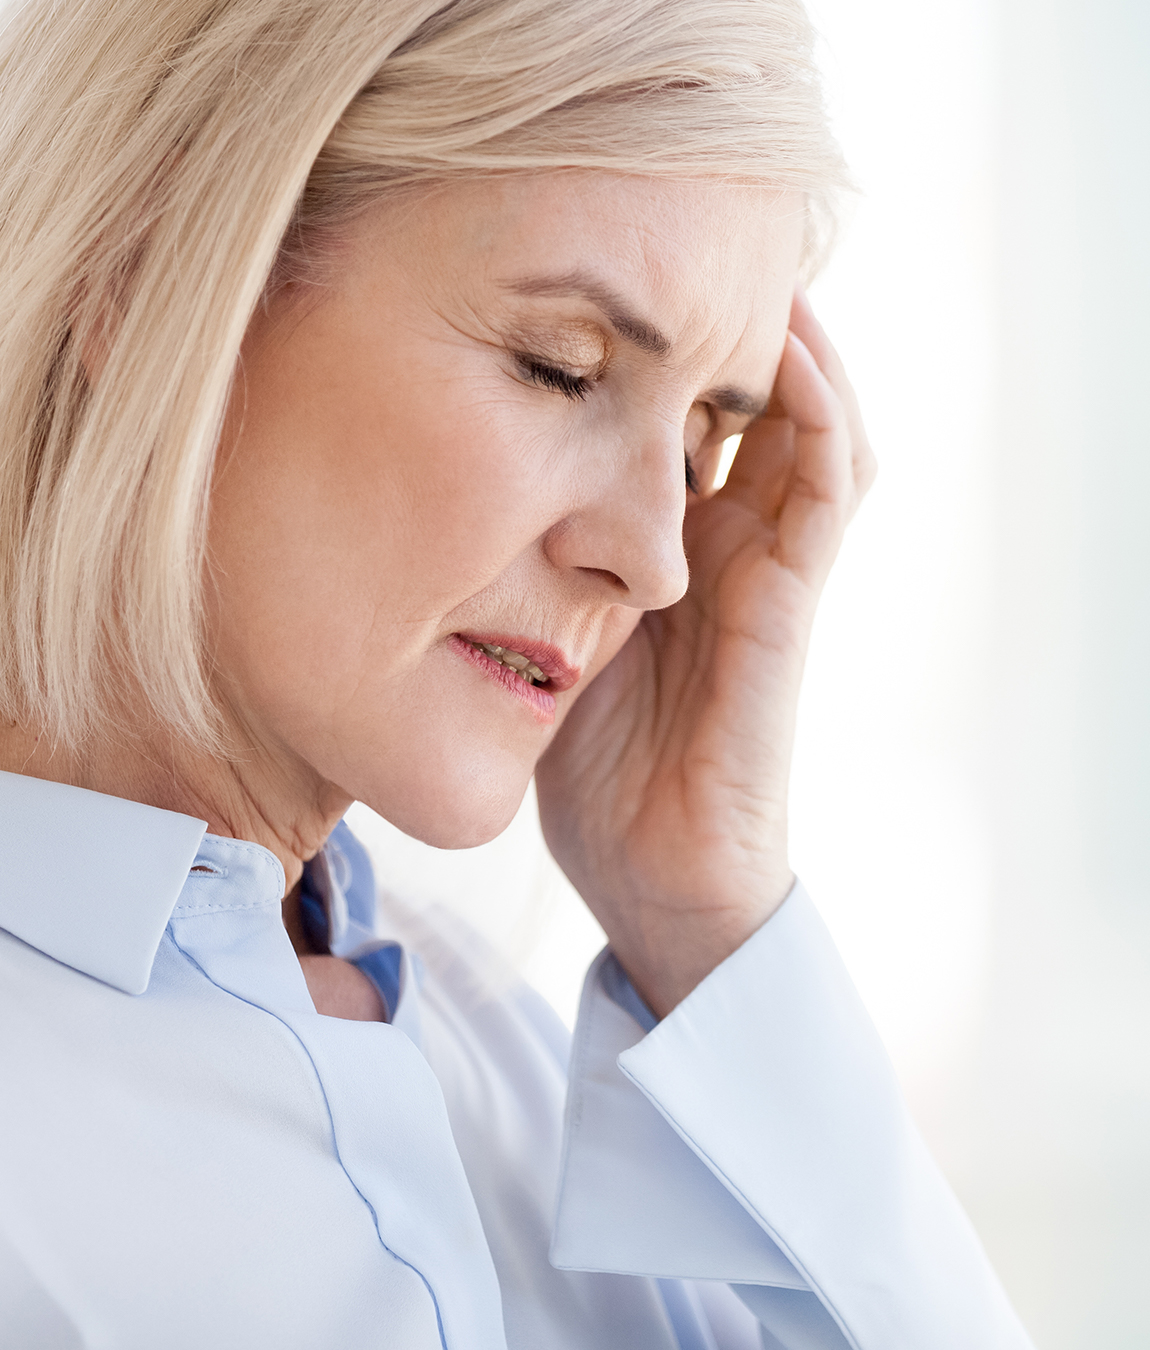 Older woman suffering from a hormonal imbalance